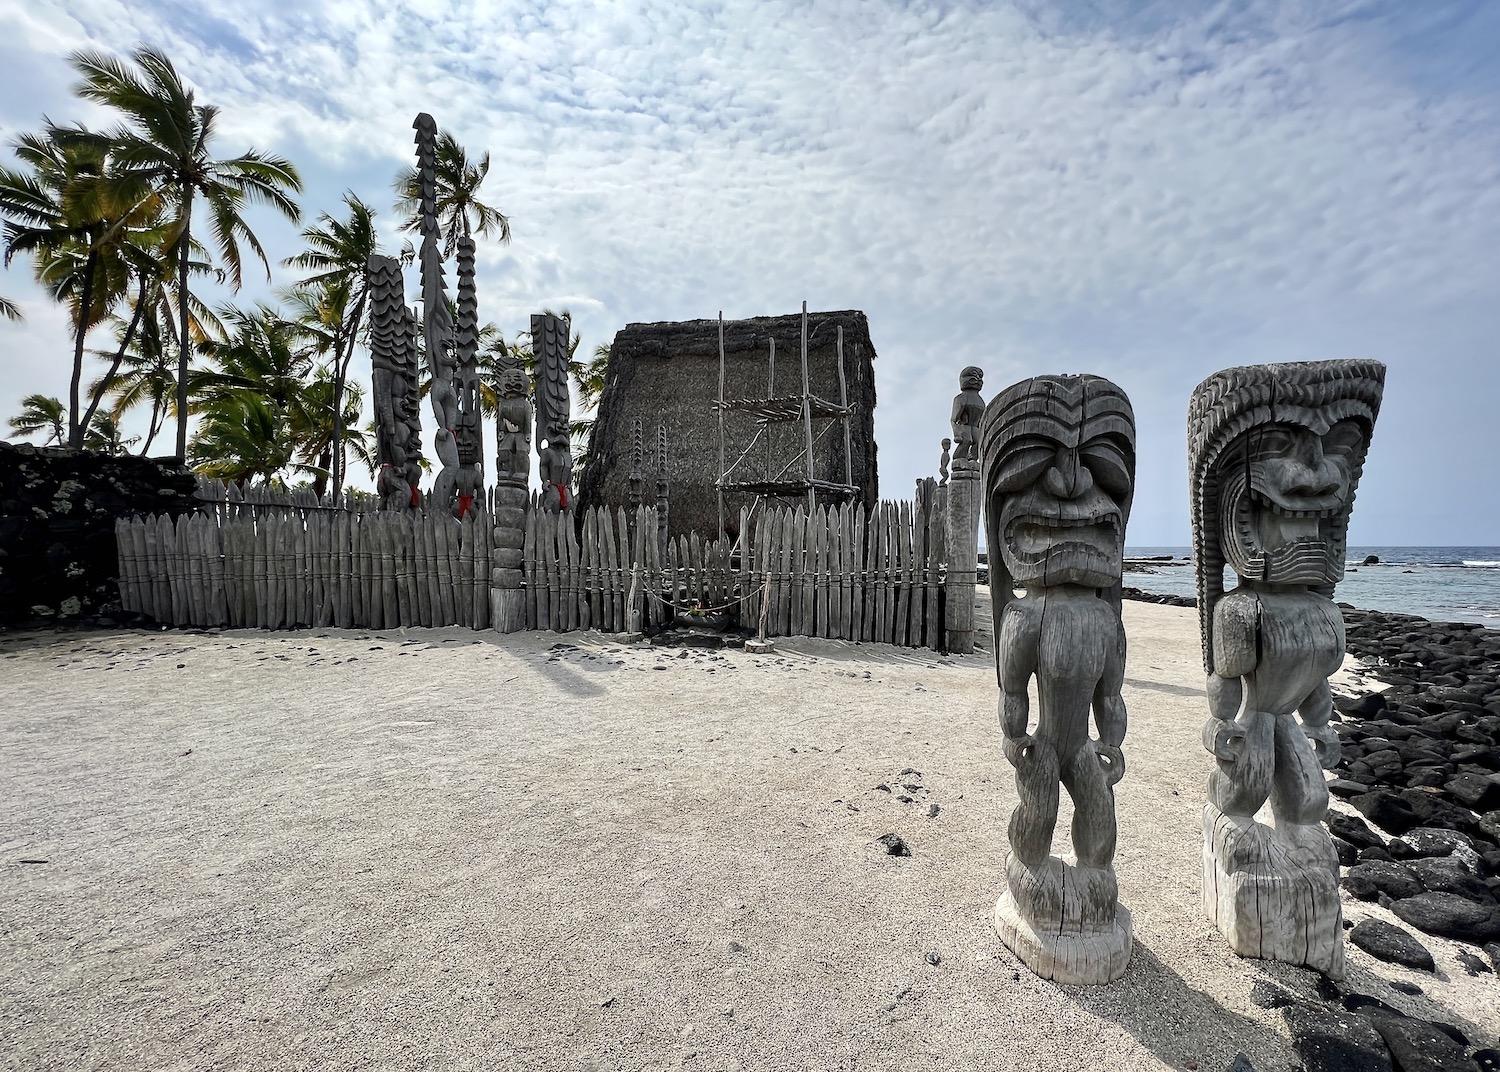 In the Royal Grounds, these two ki'i (wooden images of Hawaiian gods) are considered guardians that stand on shore to alert everyone to the great mana (spiritual power) here.